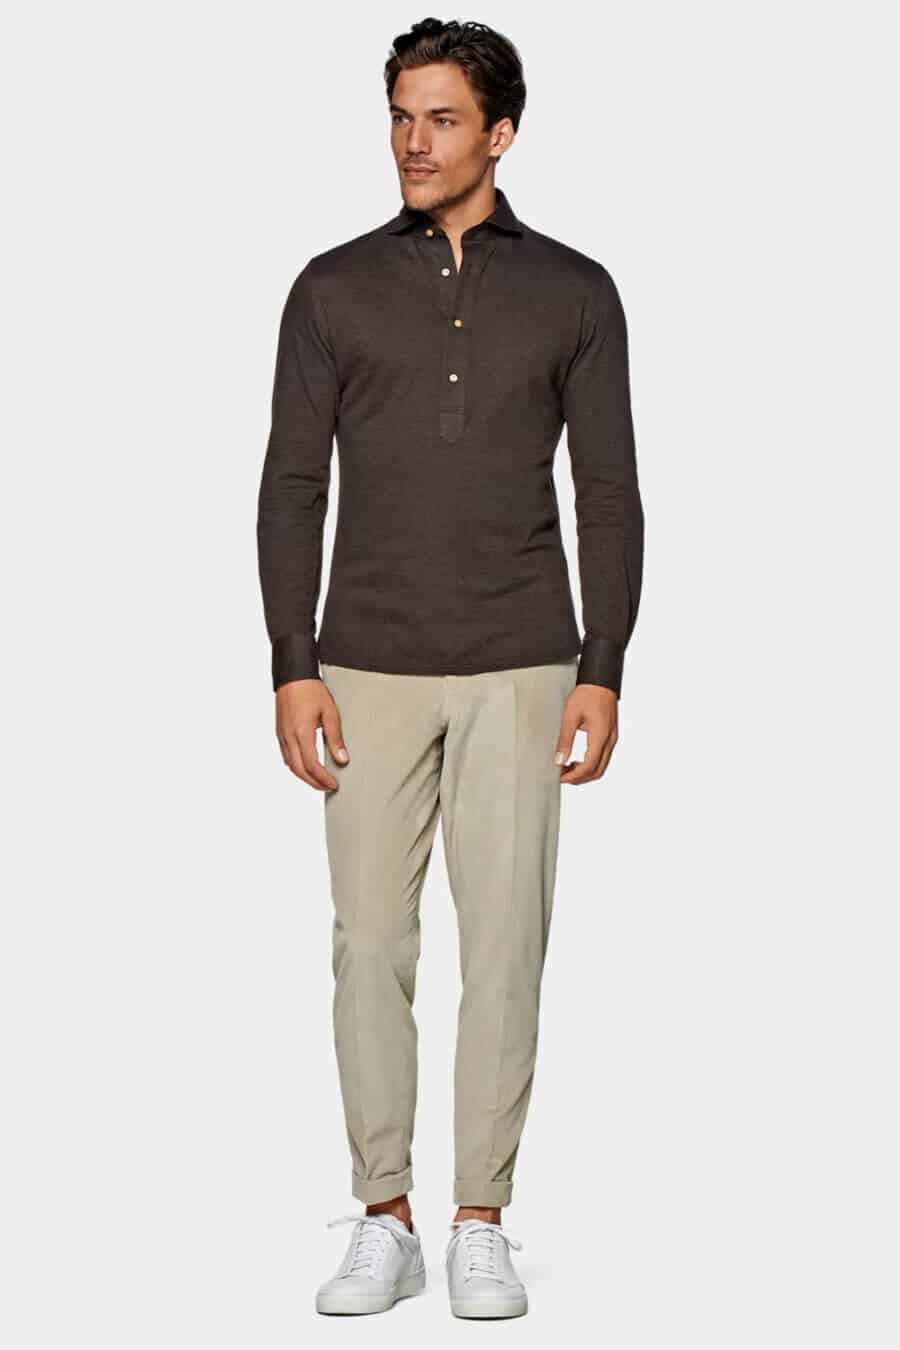 Men's khaki chinos worn with a brown knitted polo shirt and white sneakers look